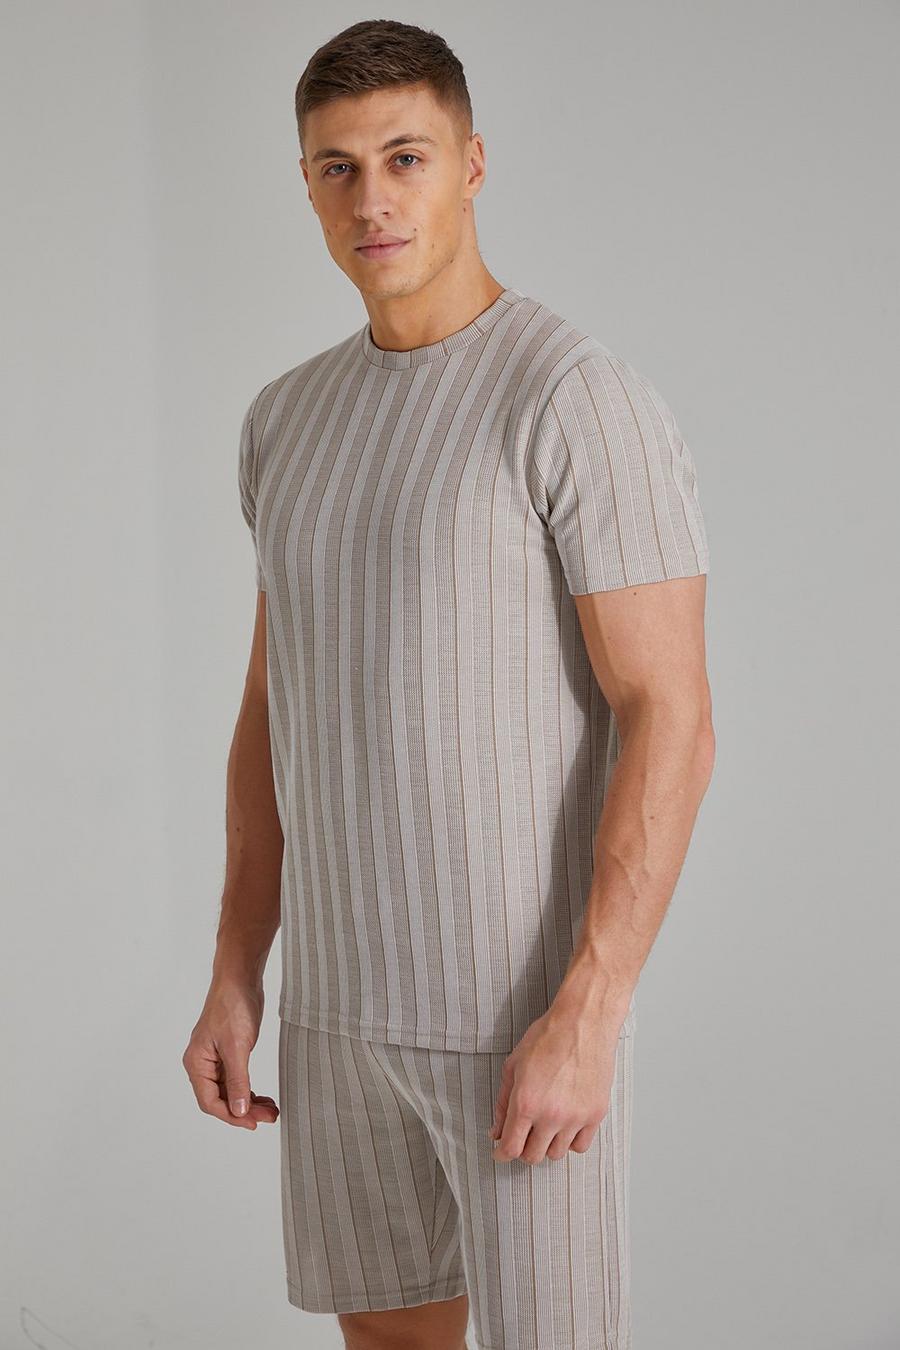 T-shirt Slim Fit in jacquard a righe, Sand beige